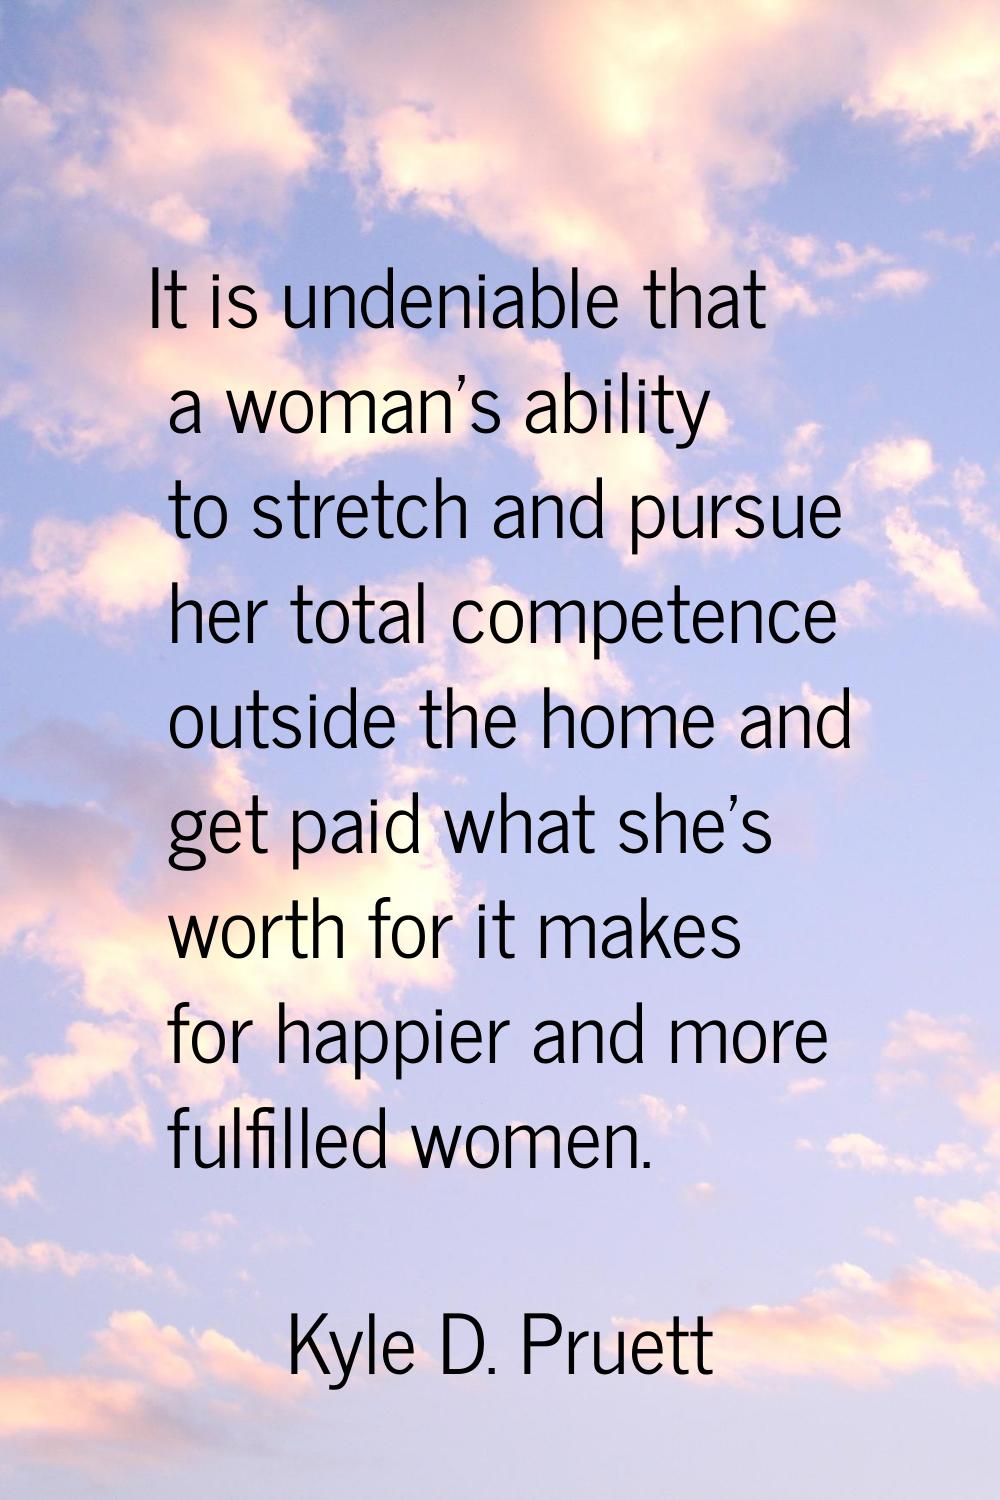 It is undeniable that a woman's ability to stretch and pursue her total competence outside the home